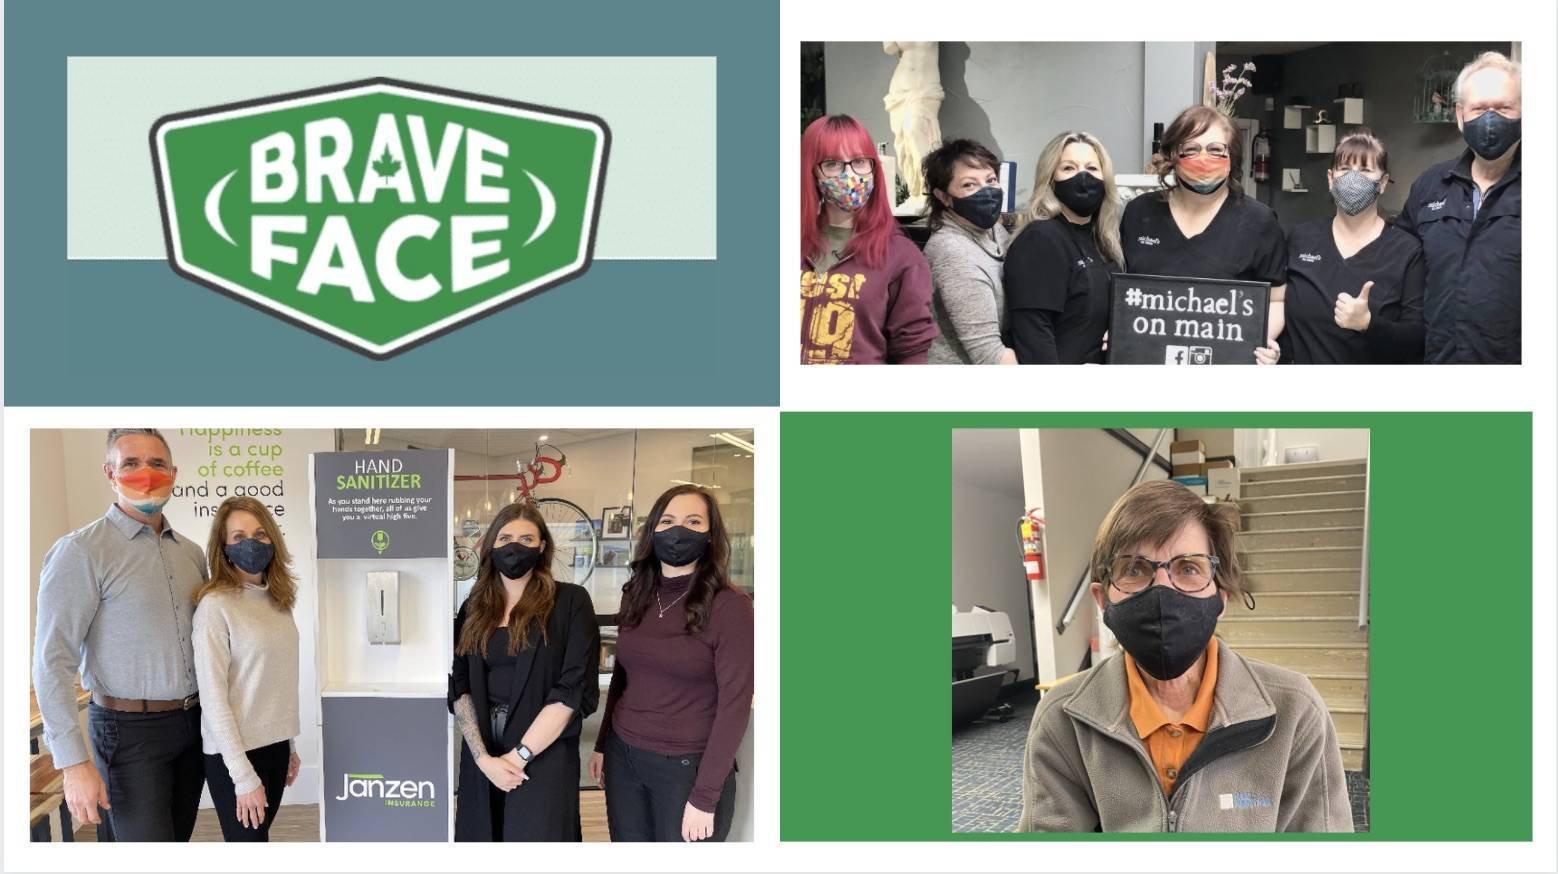 Dozens of local businesses from B.C., Alberta, and Yukon purchased masks to contribute to the campaign.Bottom left: Janzen Insurance Photo via Andrew Janzen, Bottom right: Hall Printing Photo via: Janice Underwood, Top right: Michaels on Main Photo via: Chris Franklin.